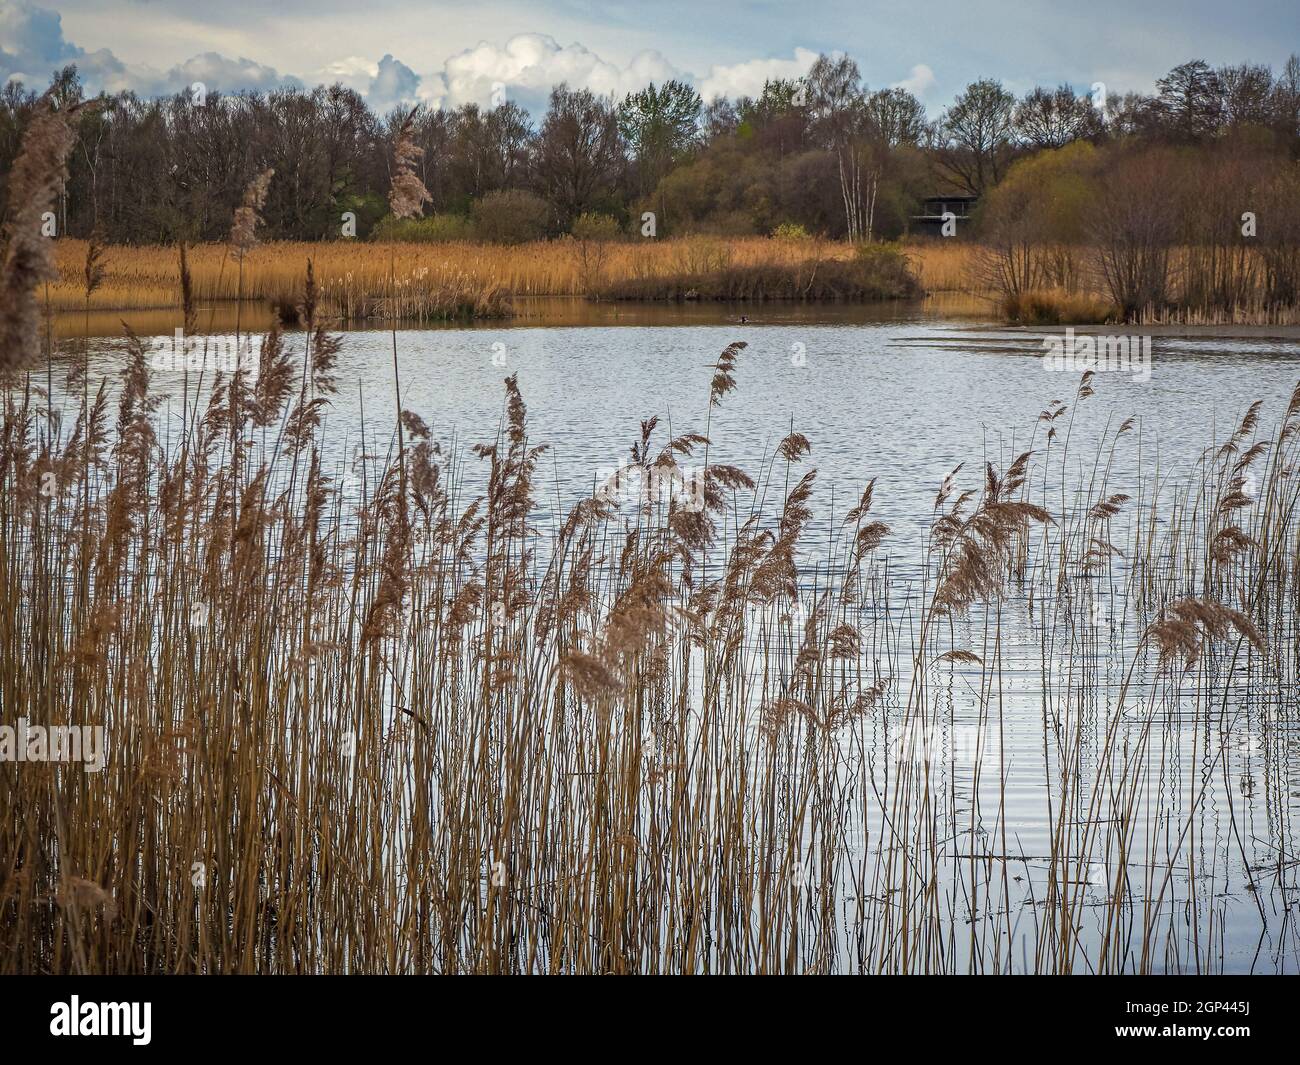 Reeds beside a lake in the wetland nature reserve Potteric Carr in South Yorkshire, England Stock Photo